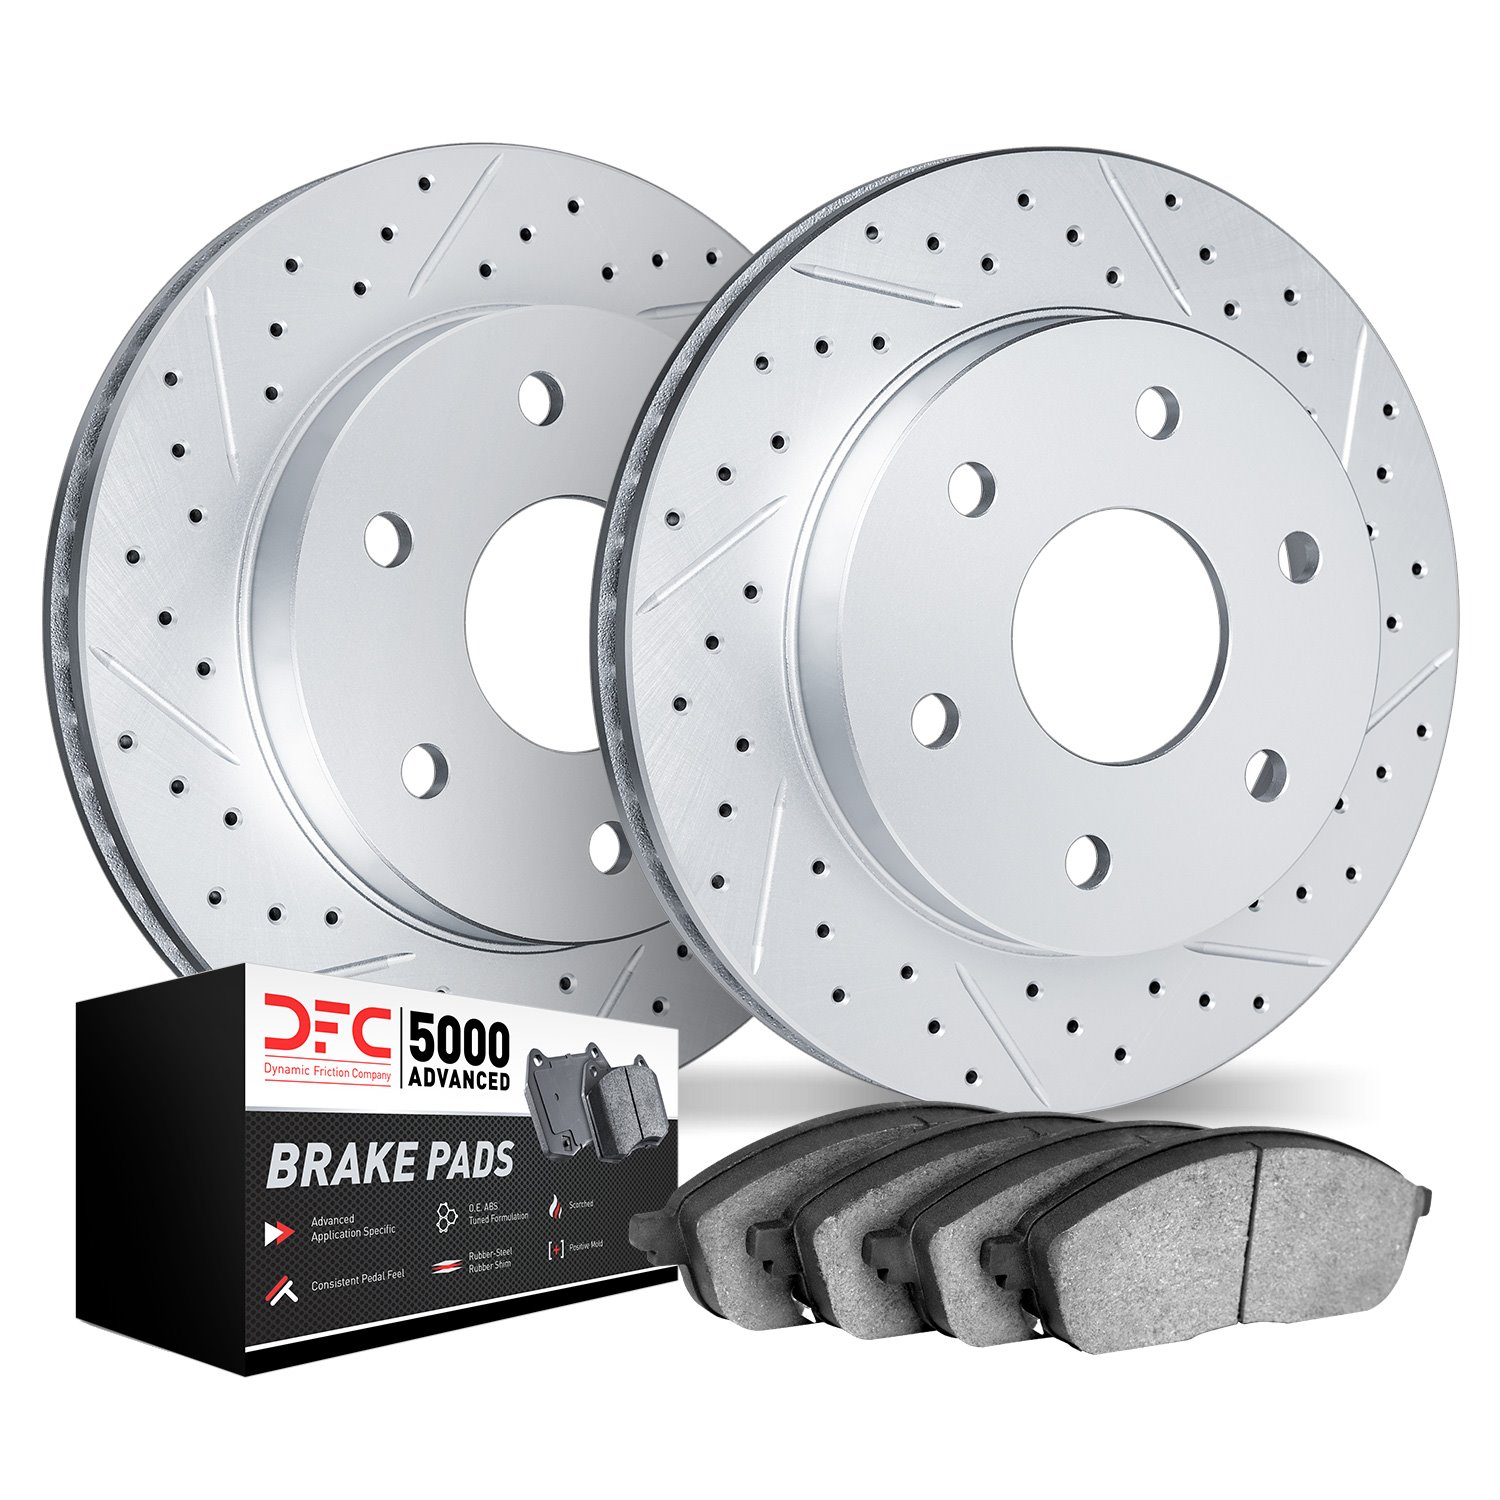 2502-40018 Geoperformance Drilled/Slotted Rotors w/5000 Advanced Brake Pads Kit, 2002-2006 Multiple Makes/Models, Position: Rear